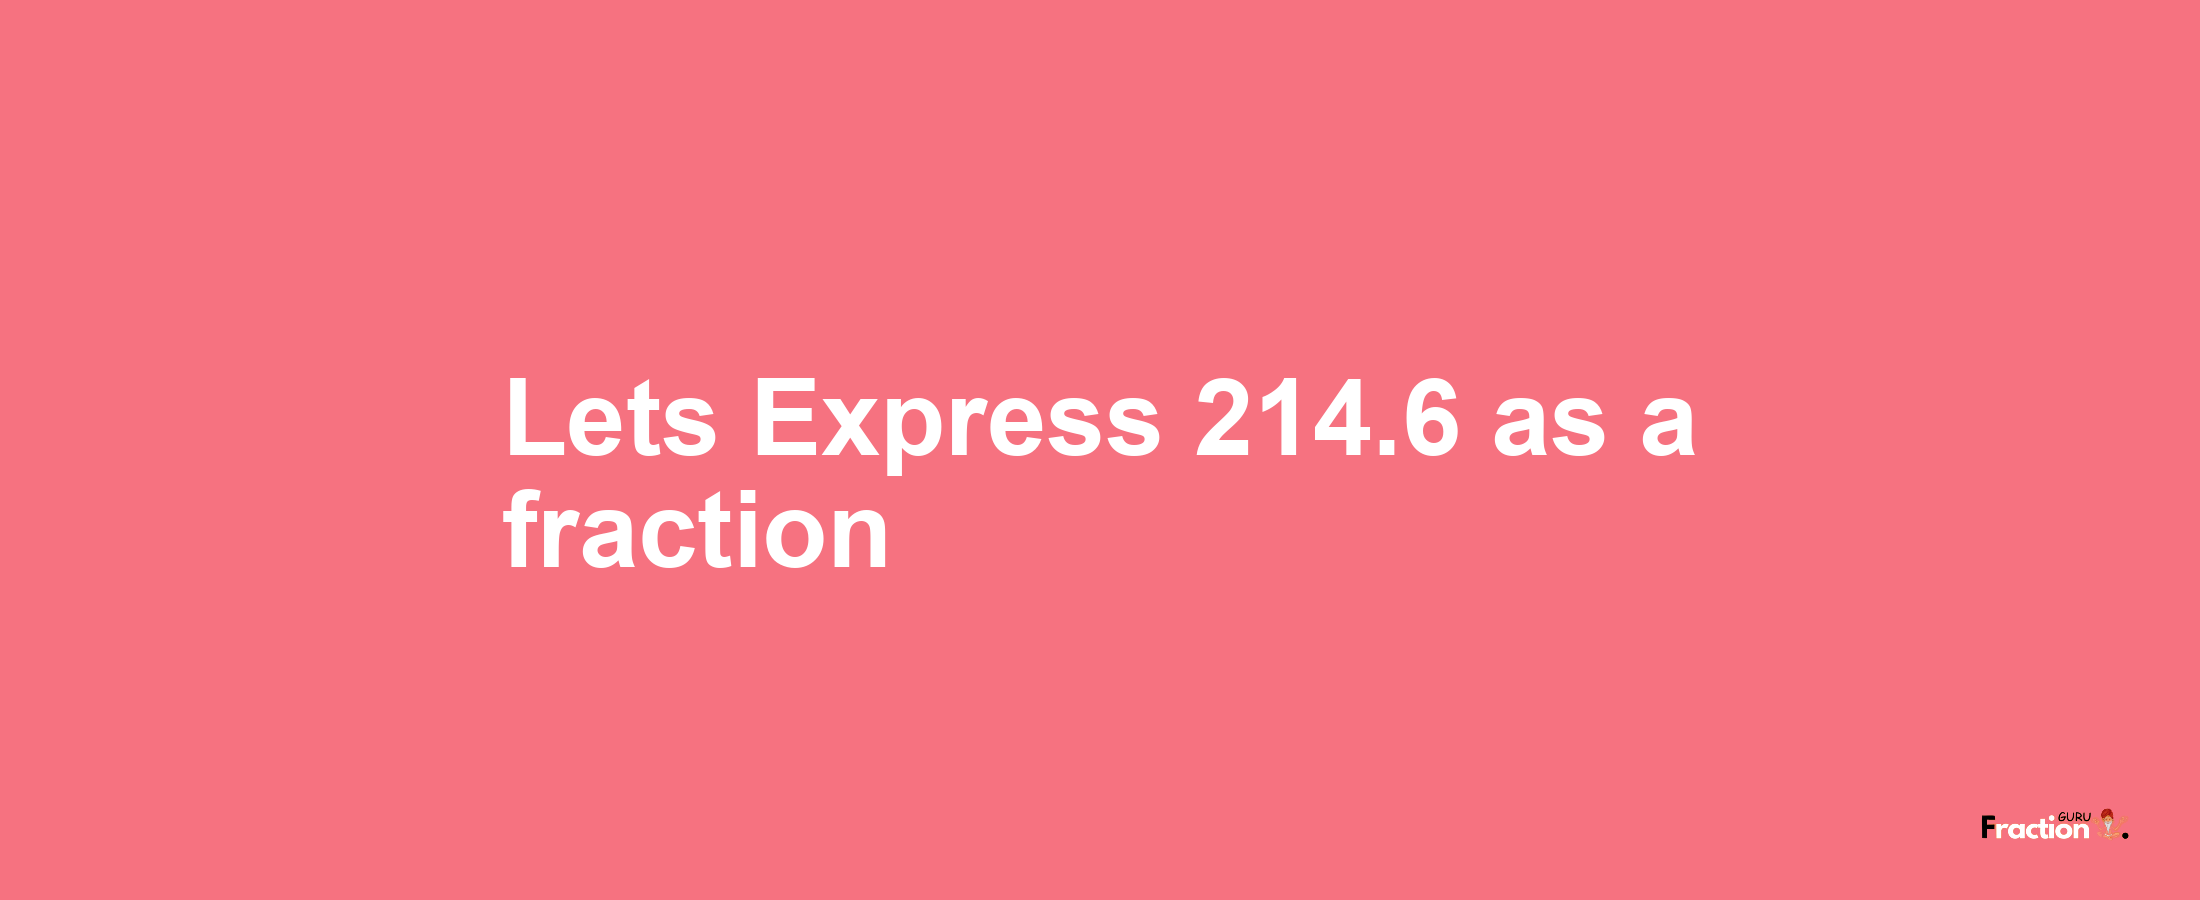 Lets Express 214.6 as afraction